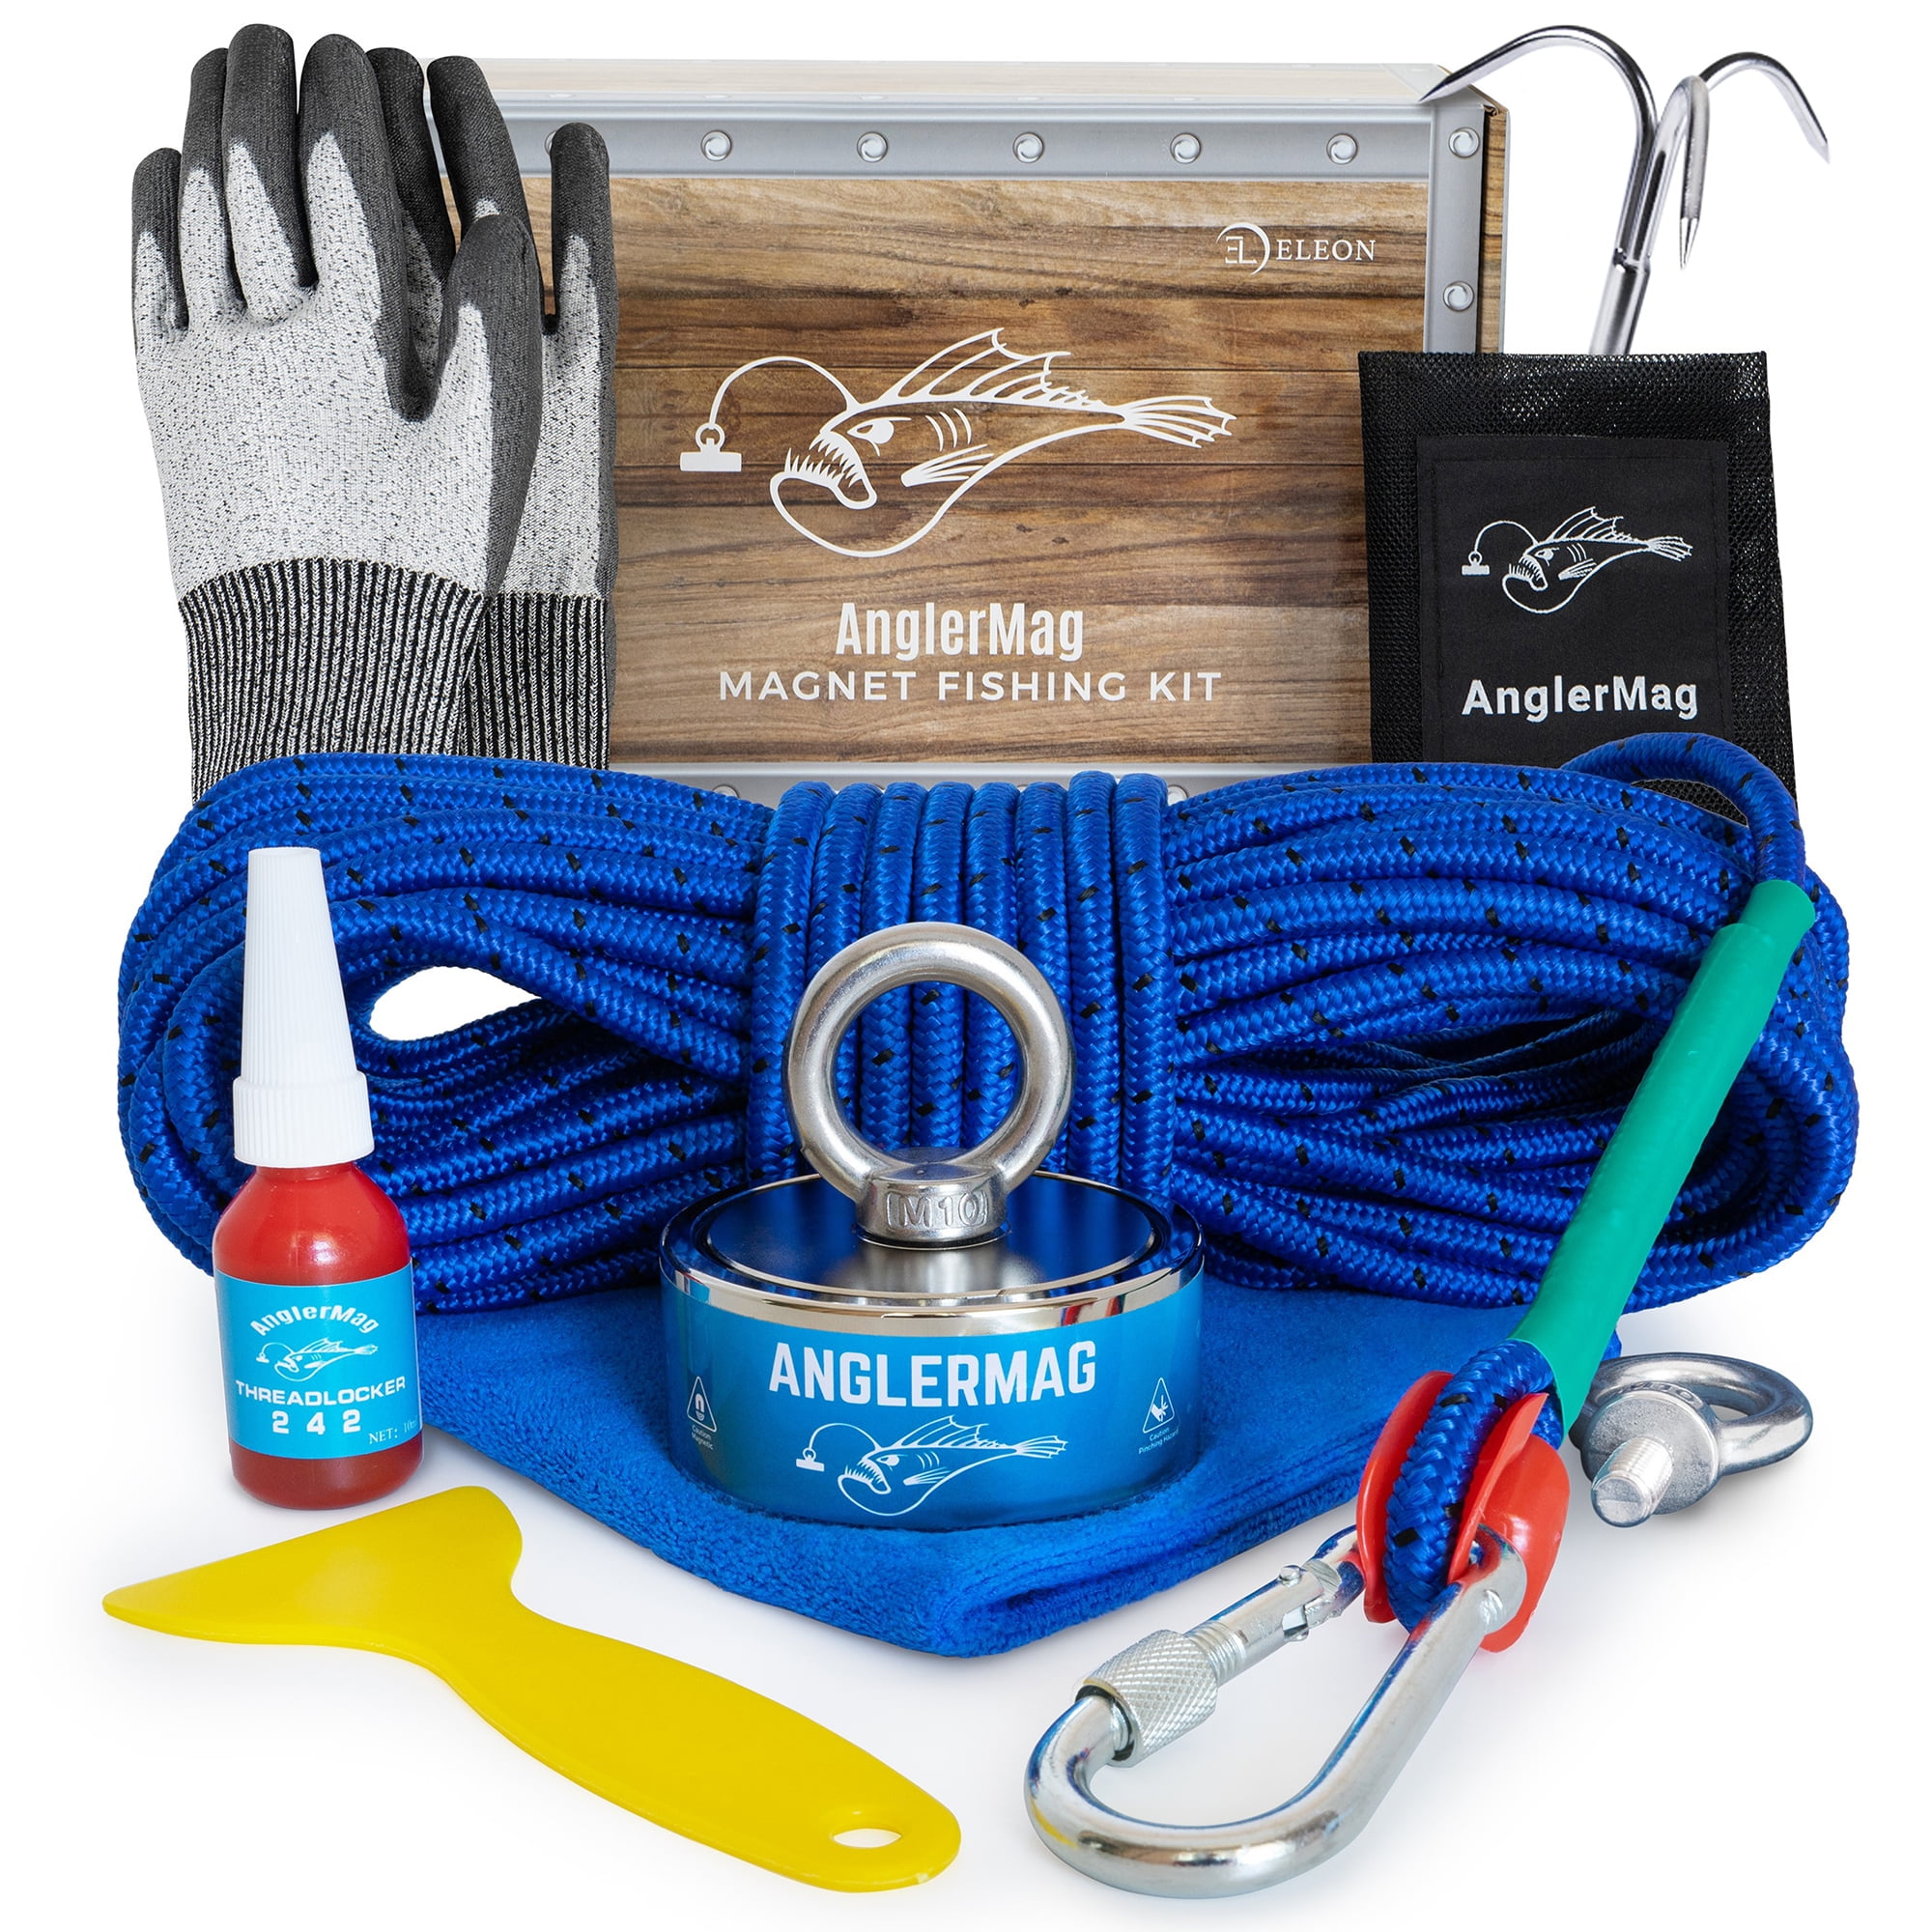 AnglerMag Magnet Fishing Kit, 1250 lbs Double Sided Magnet with